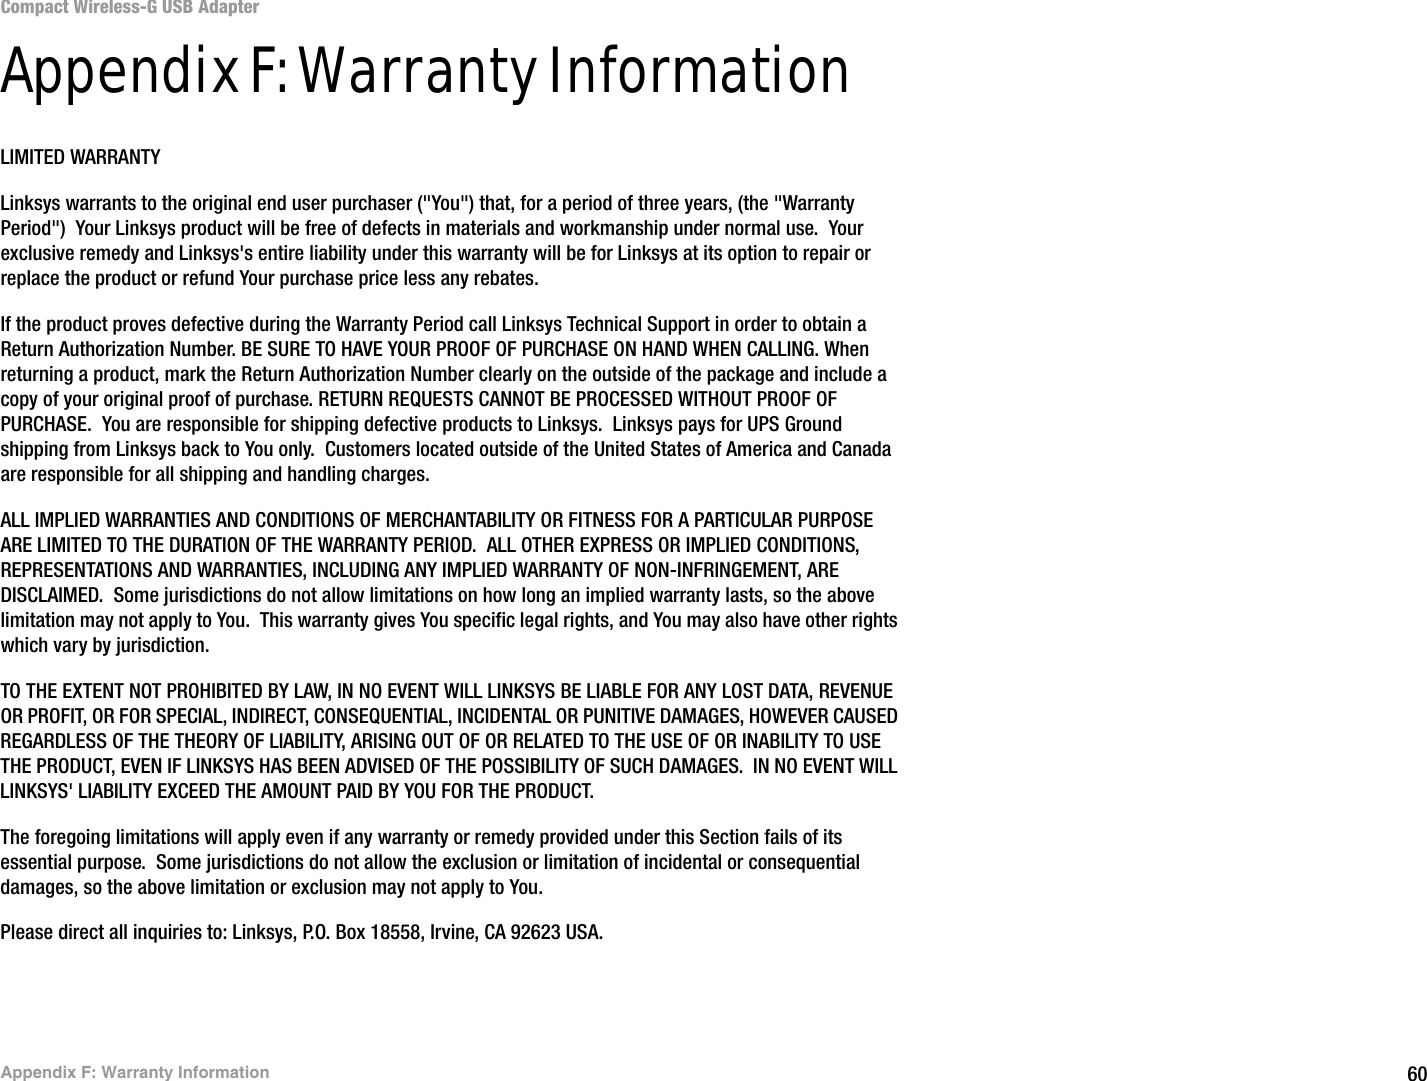 60Appendix F: Warranty InformationCompact Wireless-G USB AdapterAppendix F: Warranty InformationLIMITED WARRANTYLinksys warrants to the original end user purchaser (&quot;You&quot;) that, for a period of three years, (the &quot;Warranty Period&quot;)  Your Linksys product will be free of defects in materials and workmanship under normal use.  Your exclusive remedy and Linksys&apos;s entire liability under this warranty will be for Linksys at its option to repair or replace the product or refund Your purchase price less any rebates.If the product proves defective during the Warranty Period call Linksys Technical Support in order to obtain a Return Authorization Number. BE SURE TO HAVE YOUR PROOF OF PURCHASE ON HAND WHEN CALLING. When returning a product, mark the Return Authorization Number clearly on the outside of the package and include a copy of your original proof of purchase. RETURN REQUESTS CANNOT BE PROCESSED WITHOUT PROOF OF PURCHASE.  You are responsible for shipping defective products to Linksys.  Linksys pays for UPS Ground shipping from Linksys back to You only.  Customers located outside of the United States of America and Canada are responsible for all shipping and handling charges. ALL IMPLIED WARRANTIES AND CONDITIONS OF MERCHANTABILITY OR FITNESS FOR A PARTICULAR PURPOSE ARE LIMITED TO THE DURATION OF THE WARRANTY PERIOD.  ALL OTHER EXPRESS OR IMPLIED CONDITIONS, REPRESENTATIONS AND WARRANTIES, INCLUDING ANY IMPLIED WARRANTY OF NON-INFRINGEMENT, ARE DISCLAIMED.  Some jurisdictions do not allow limitations on how long an implied warranty lasts, so the above limitation may not apply to You.  This warranty gives You specific legal rights, and You may also have other rights which vary by jurisdiction.TO THE EXTENT NOT PROHIBITED BY LAW, IN NO EVENT WILL LINKSYS BE LIABLE FOR ANY LOST DATA, REVENUE OR PROFIT, OR FOR SPECIAL, INDIRECT, CONSEQUENTIAL, INCIDENTAL OR PUNITIVE DAMAGES, HOWEVER CAUSED REGARDLESS OF THE THEORY OF LIABILITY, ARISING OUT OF OR RELATED TO THE USE OF OR INABILITY TO USE THE PRODUCT, EVEN IF LINKSYS HAS BEEN ADVISED OF THE POSSIBILITY OF SUCH DAMAGES.  IN NO EVENT WILL LINKSYS&apos; LIABILITY EXCEED THE AMOUNT PAID BY YOU FOR THE PRODUCT.  The foregoing limitations will apply even if any warranty or remedy provided under this Section fails of its essential purpose.  Some jurisdictions do not allow the exclusion or limitation of incidental or consequential damages, so the above limitation or exclusion may not apply to You.Please direct all inquiries to: Linksys, P.O. Box 18558, Irvine, CA 92623 USA.